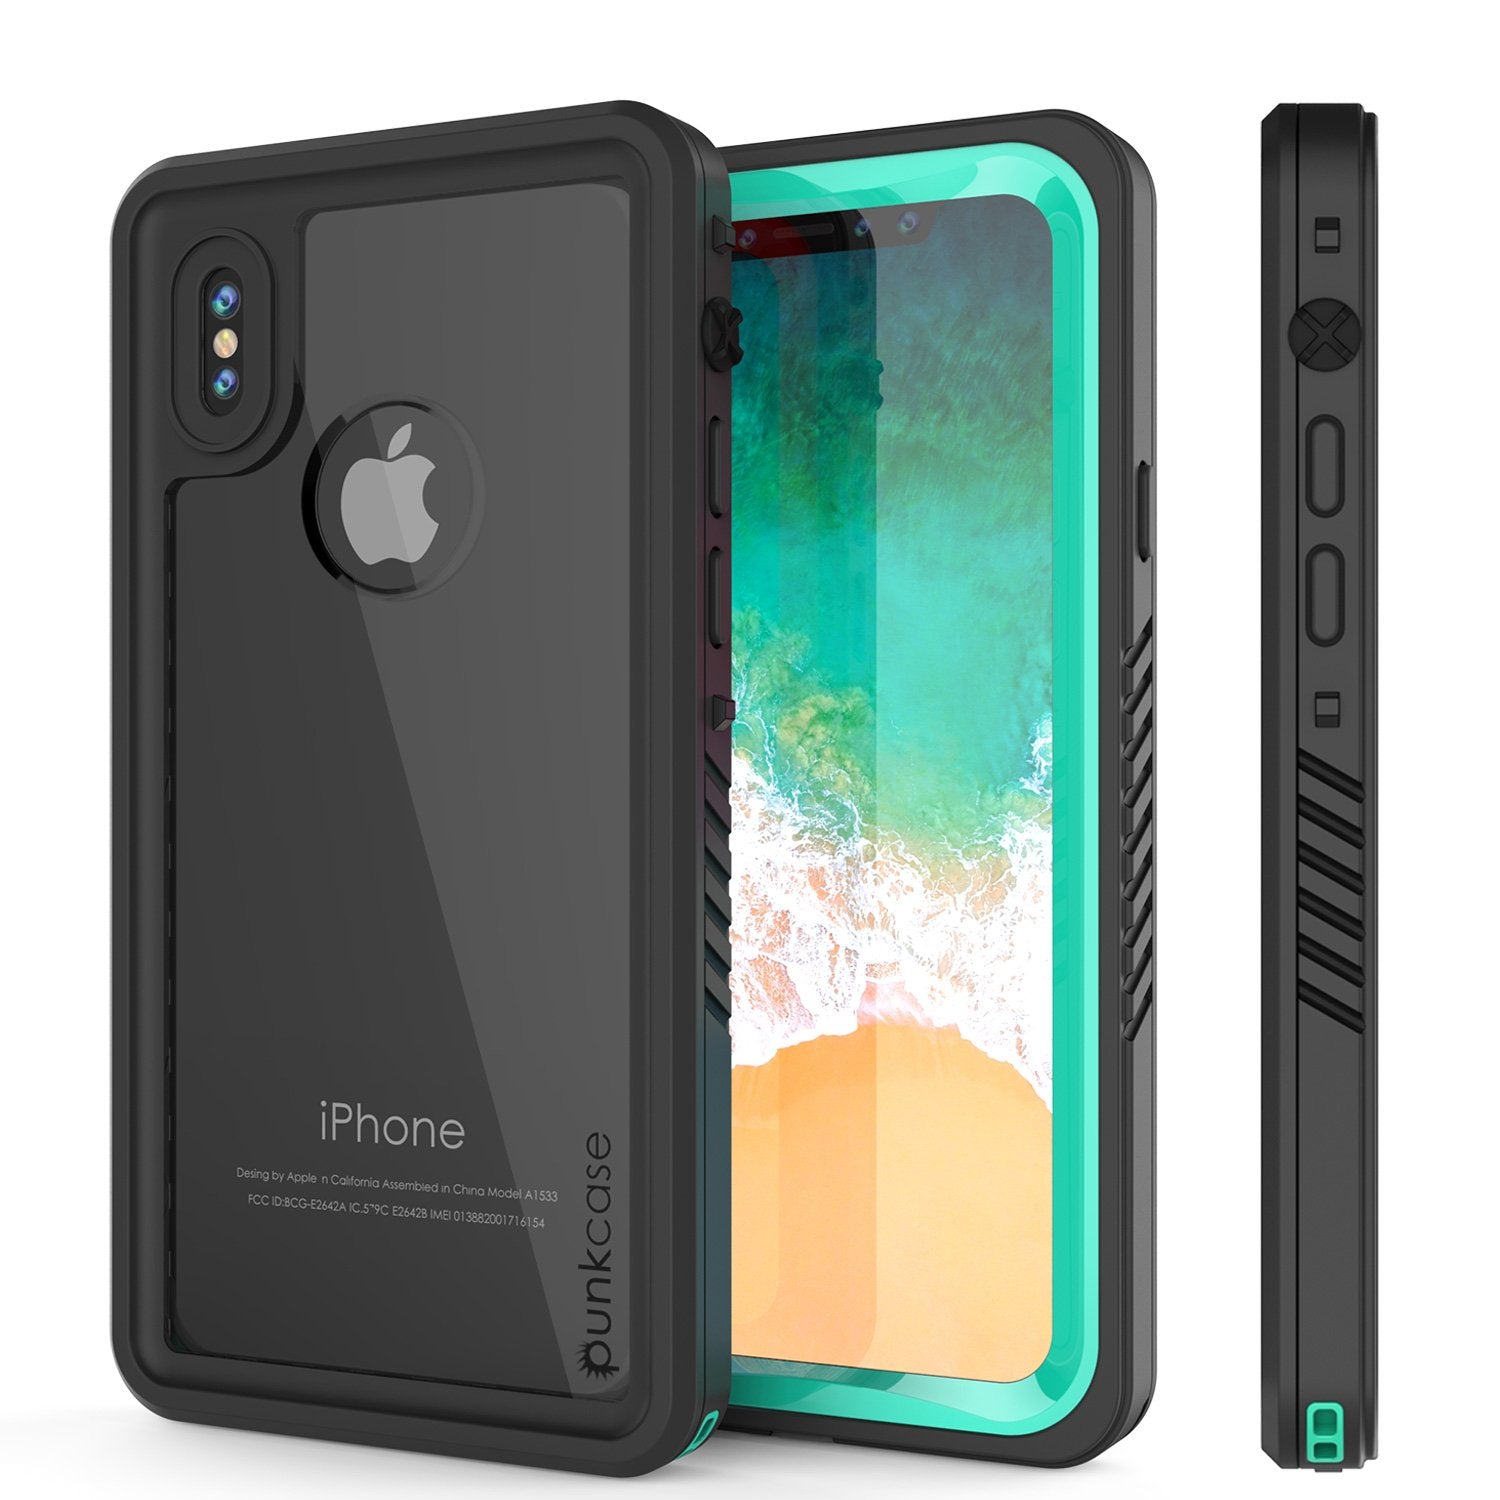 iPhone X Case, Punkcase [Extreme Series] [Slim Fit] [IP68 Certified] [Teal]